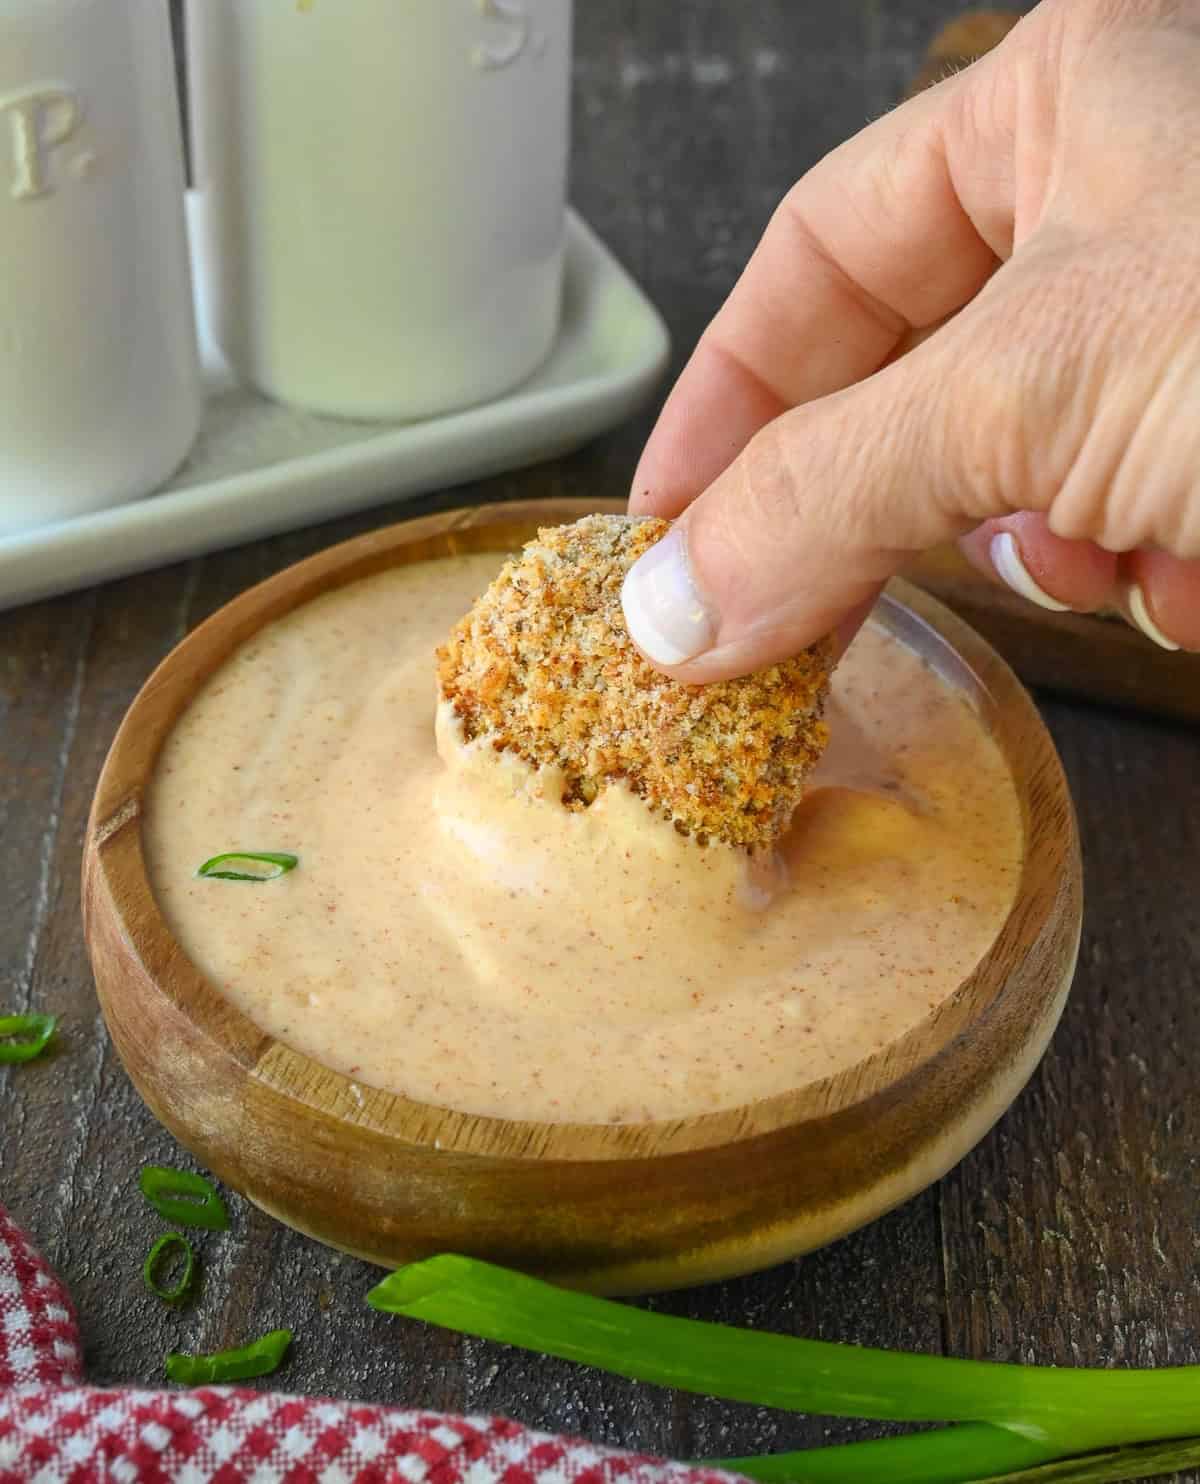 A chicken nugget being dipped into yum yum sauce.